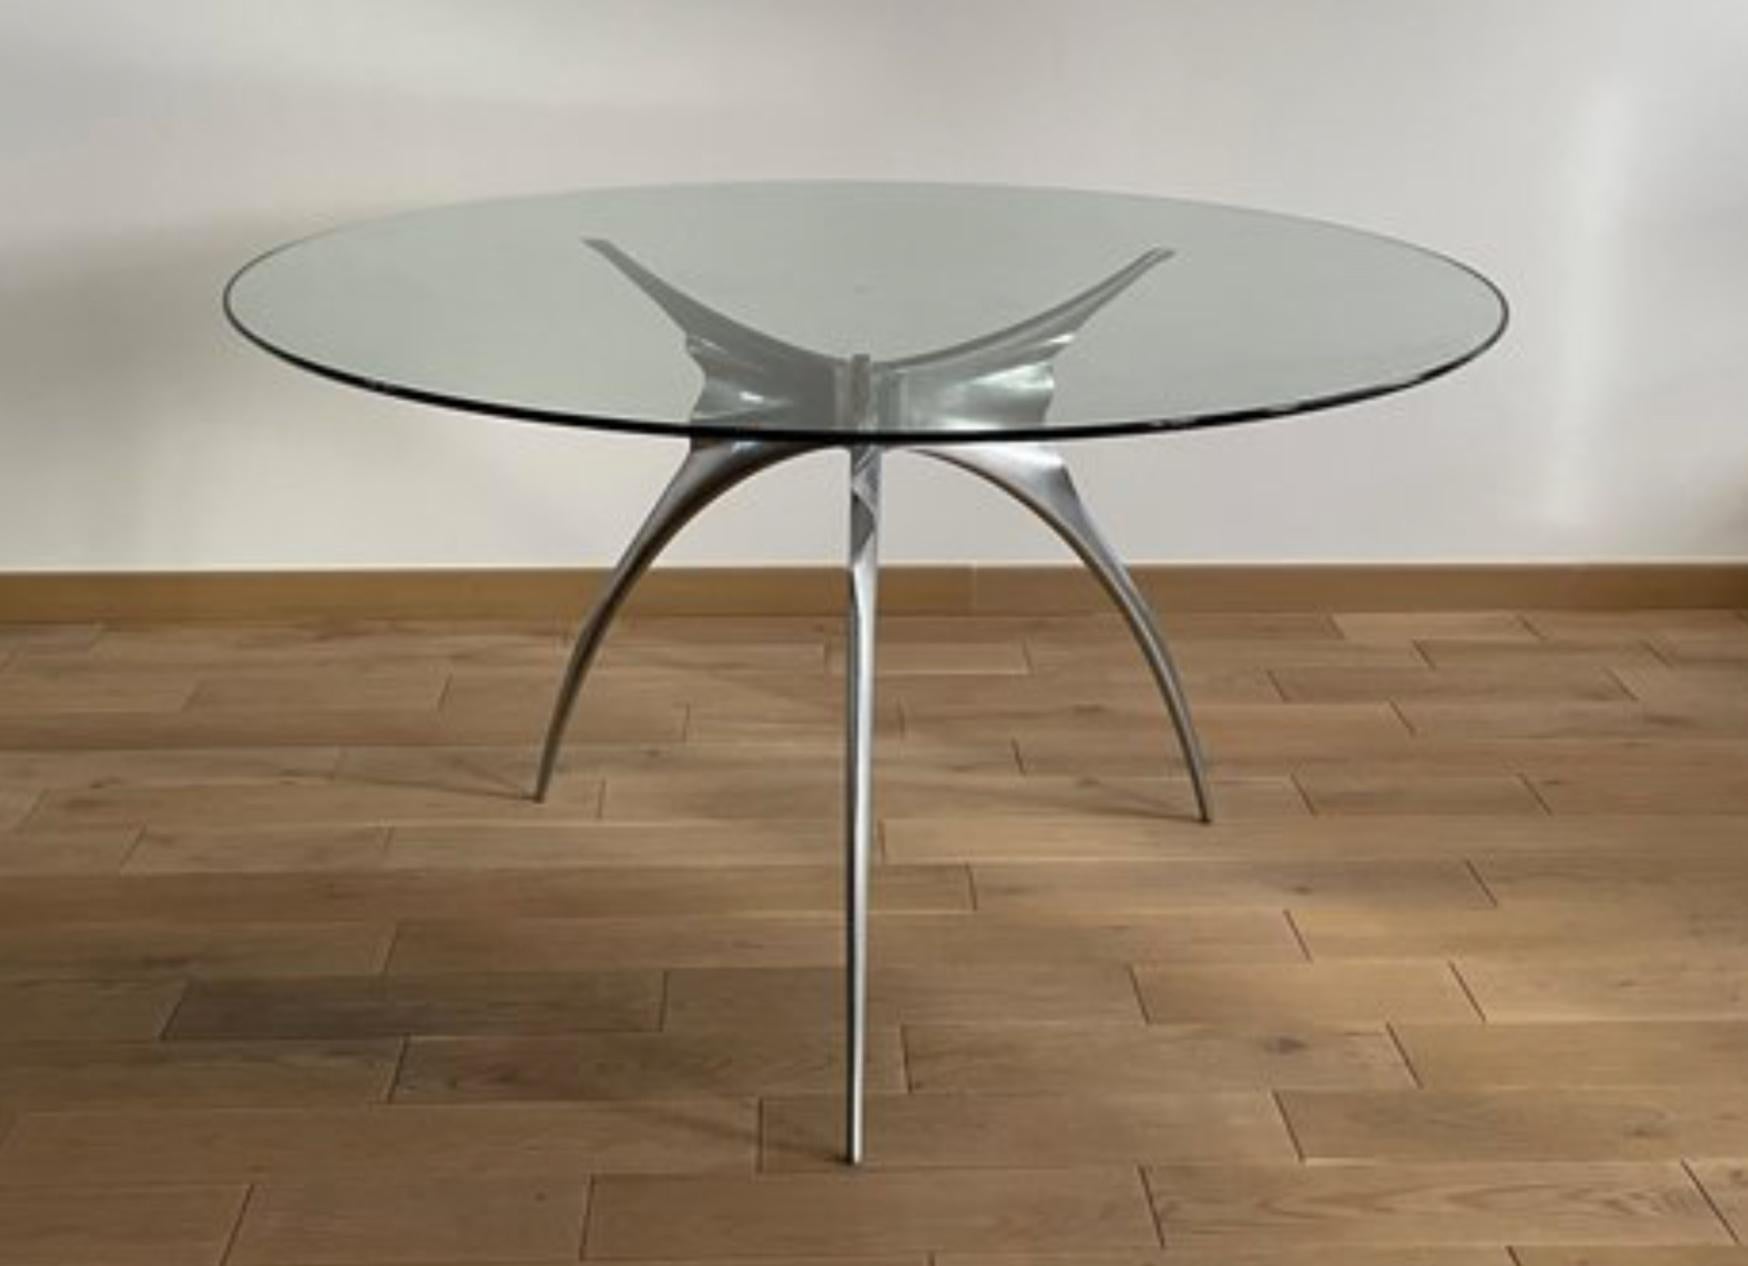 French round table water model Errance by Bernard Dequet for Protis and dating from the 70s. Polished aluminum sculptural base on which a tempered glass rests. The base can be disposed in both directions. Very good general condition. Vintage Design.